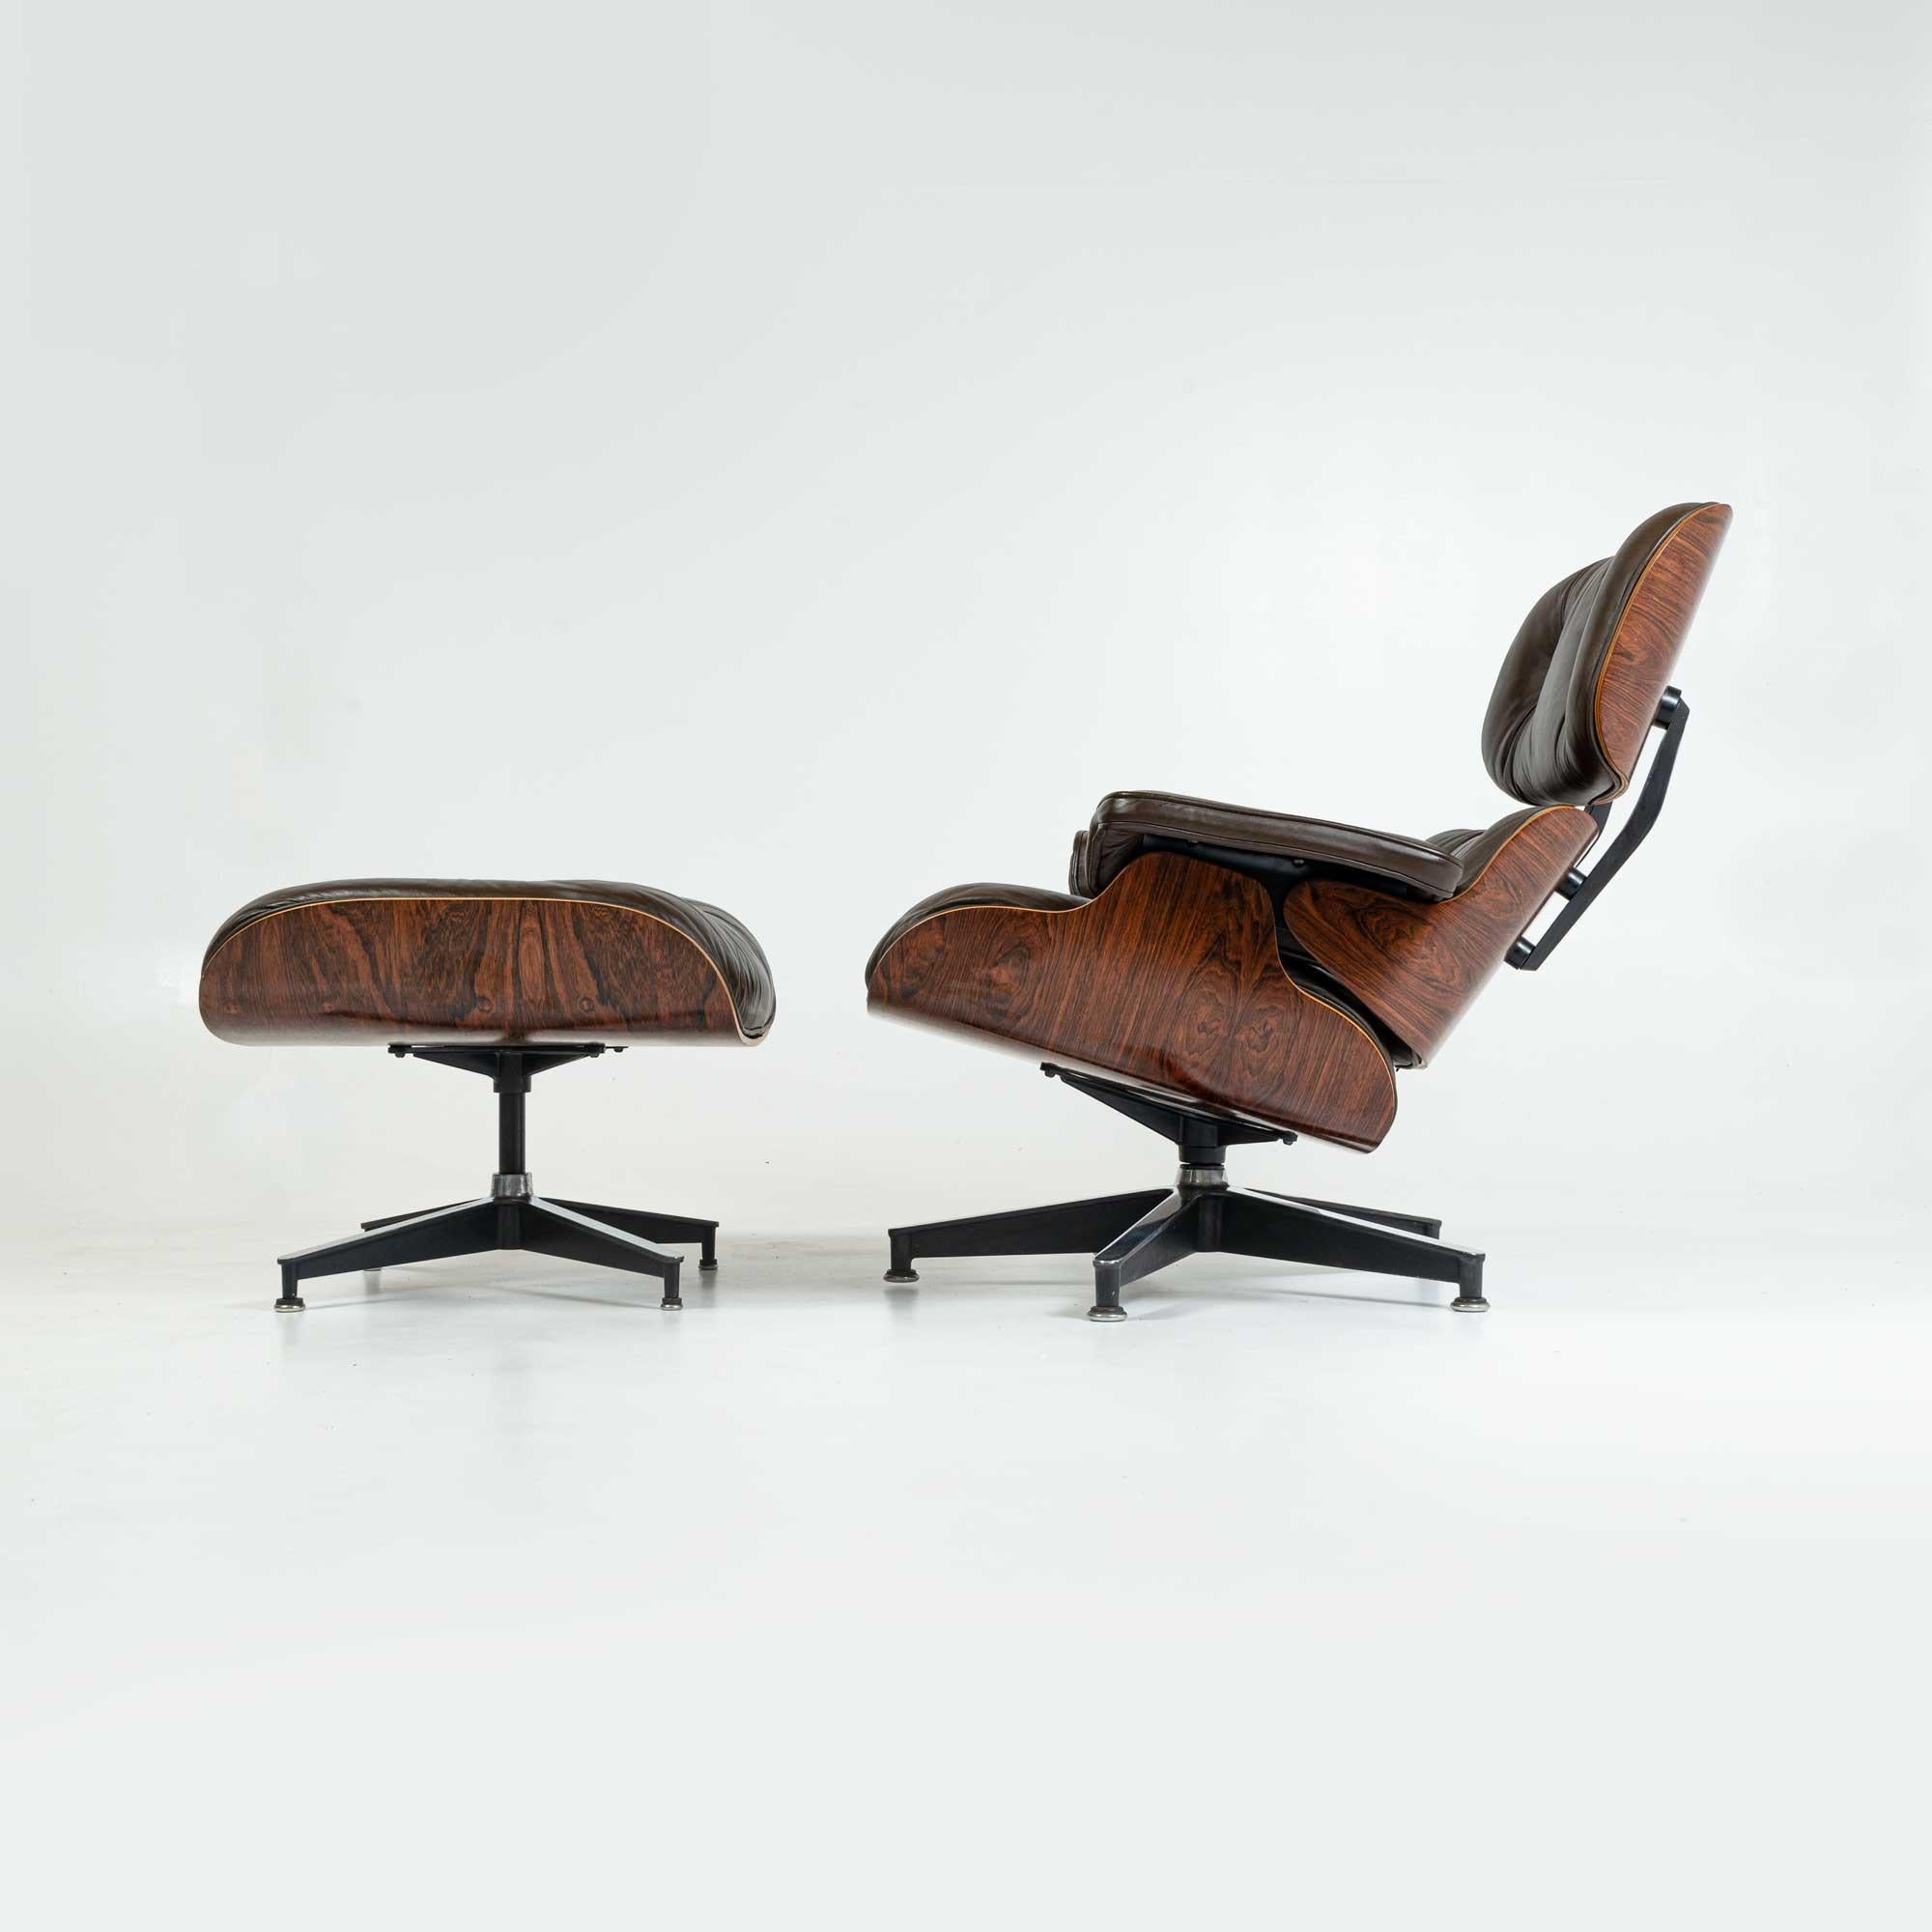 Fully Restored 3rd Gen Eames lounge chair in rosewood shell frames with ottoman, in original chocolate leather cushions. The chair has been restored and refinished in lacquer. Metal frame elements were re-polished to shine.